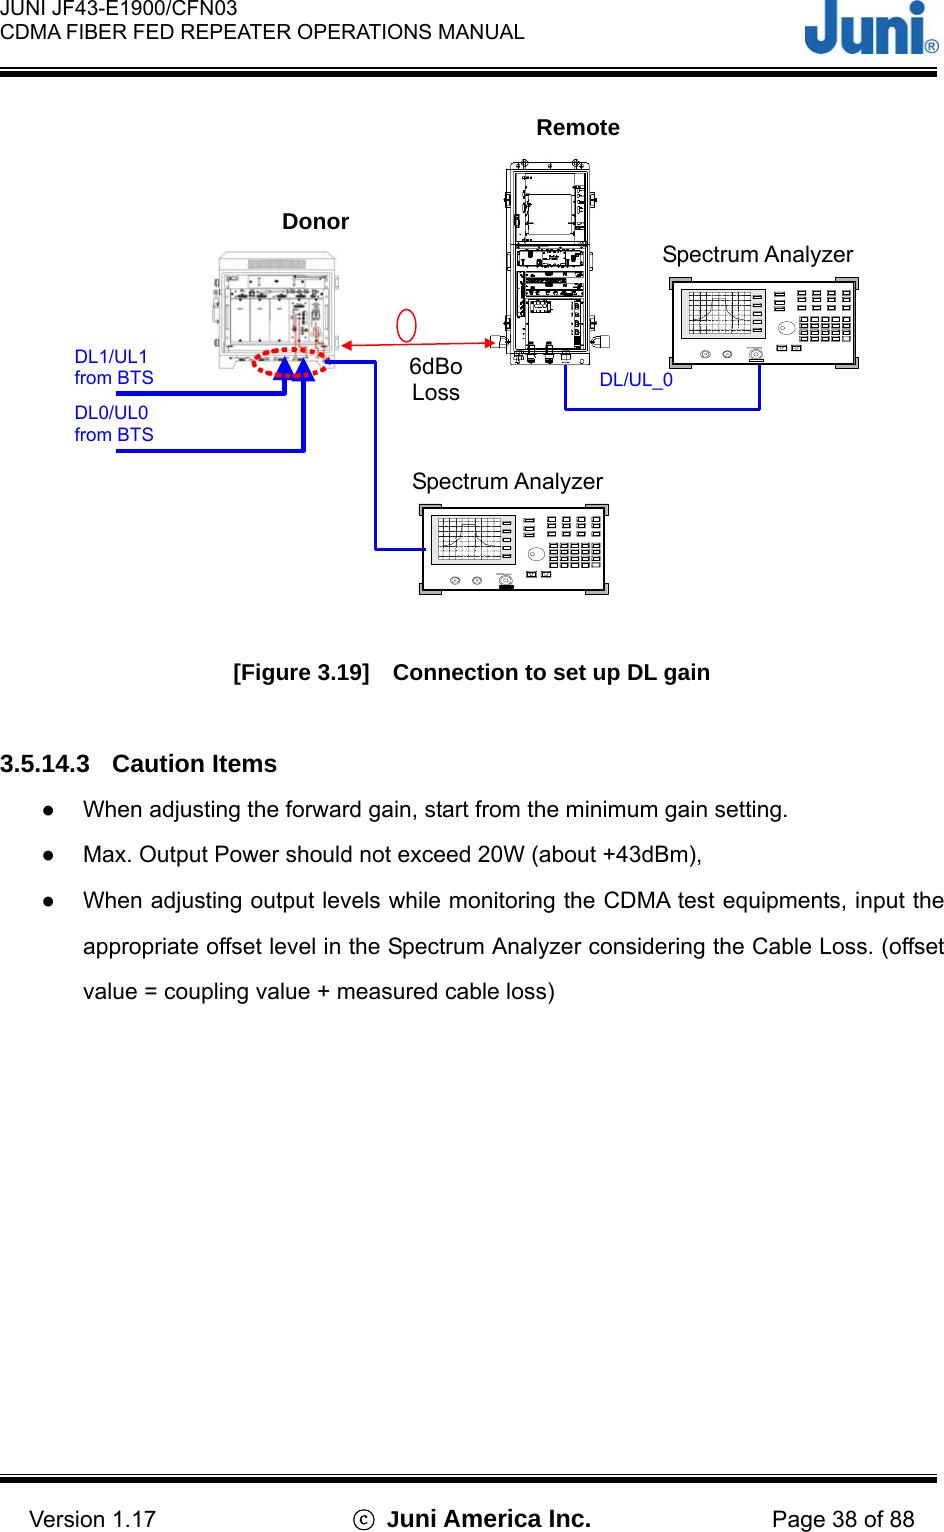  JUNI JF43-E1900/CFN03 CDMA FIBER FED REPEATER OPERATIONS MANUAL                                    Version 1.17  ⓒ Juni America Inc. Page 38 of 88   [Figure 3.19]    Connection to set up DL gain  3.5.14.3 Caution Items ●  When adjusting the forward gain, start from the minimum gain setting. ●  Max. Output Power should not exceed 20W (about +43dBm), ●  When adjusting output levels while monitoring the CDMA test equipments, input the appropriate offset level in the Spectrum Analyzer considering the Cable Loss. (offset value = coupling value + measured cable loss)  DL/UL_0DL1/UL1 from BTS Donor  6dBoLossSpectrum Analyzer Remote DL0/UL0 from BTS Spectrum Analyzer